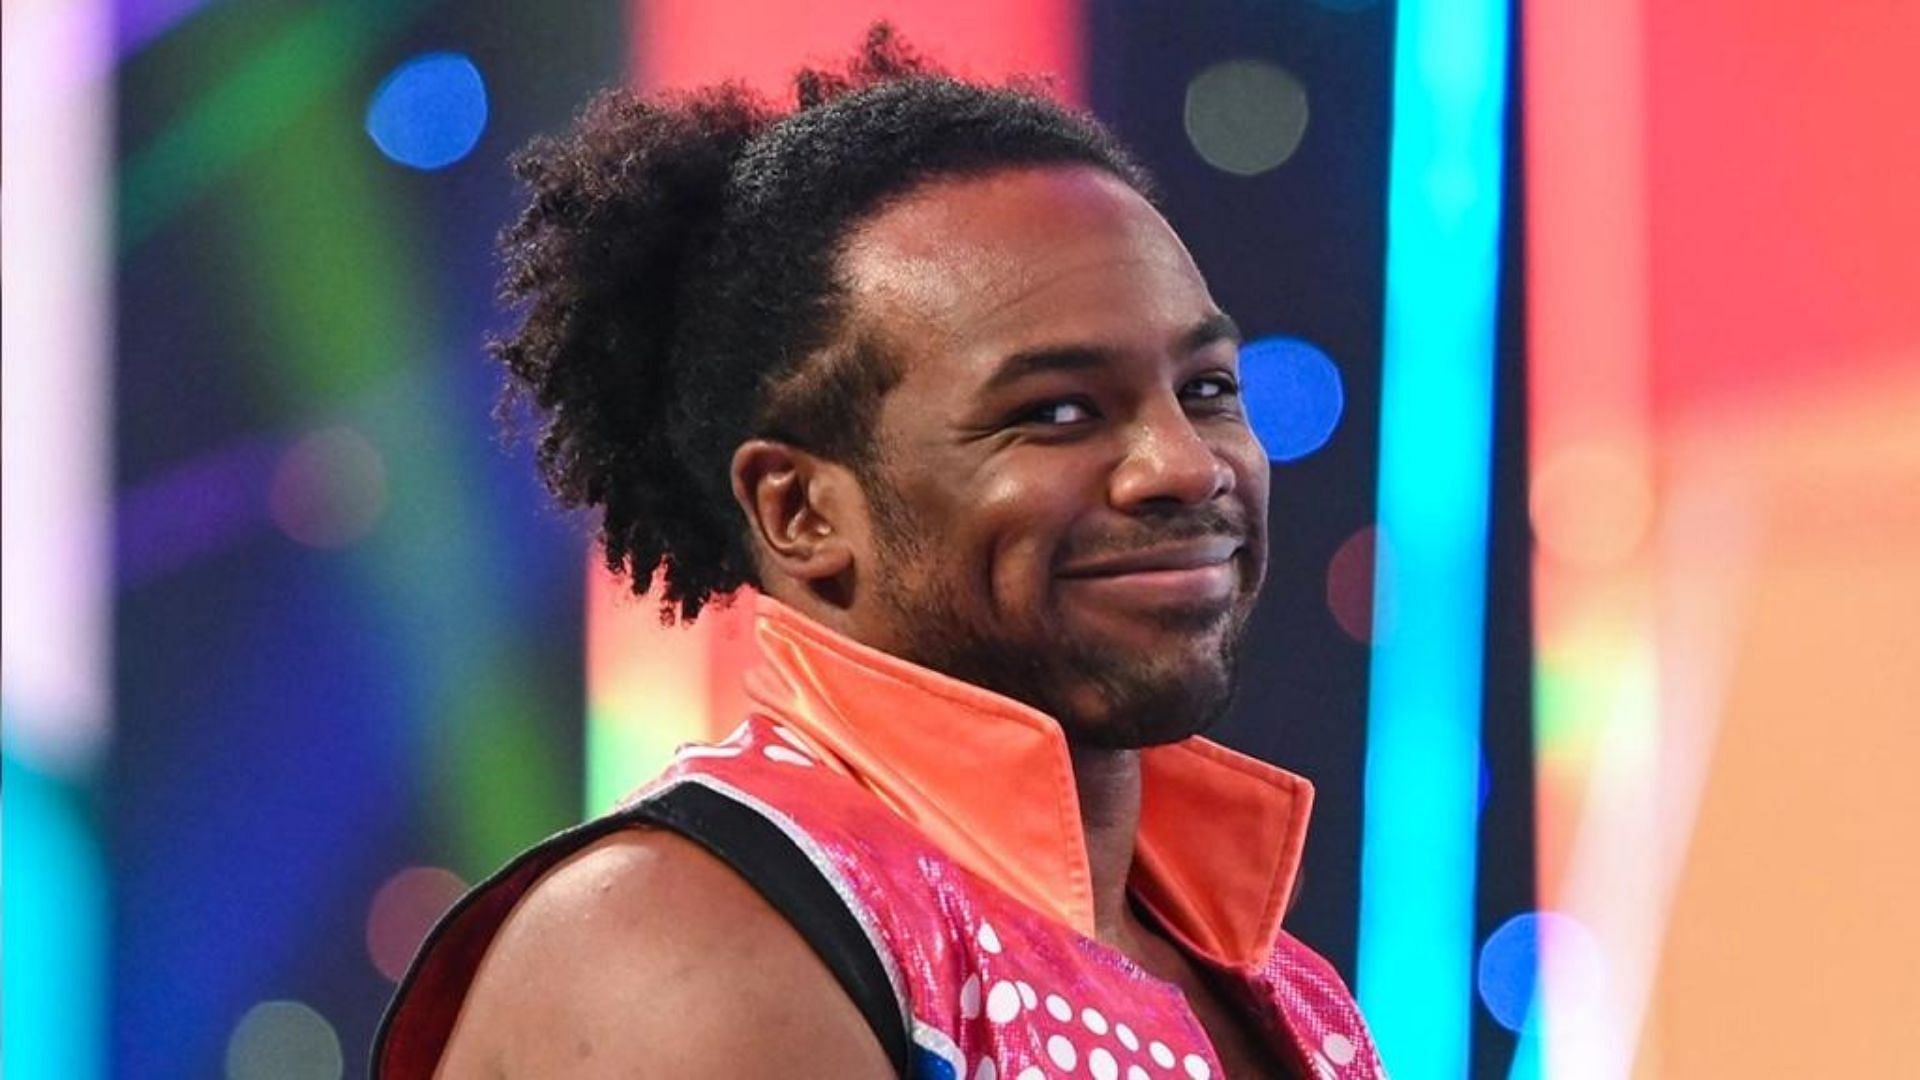 Xavier Woods had some interesting things to say this week